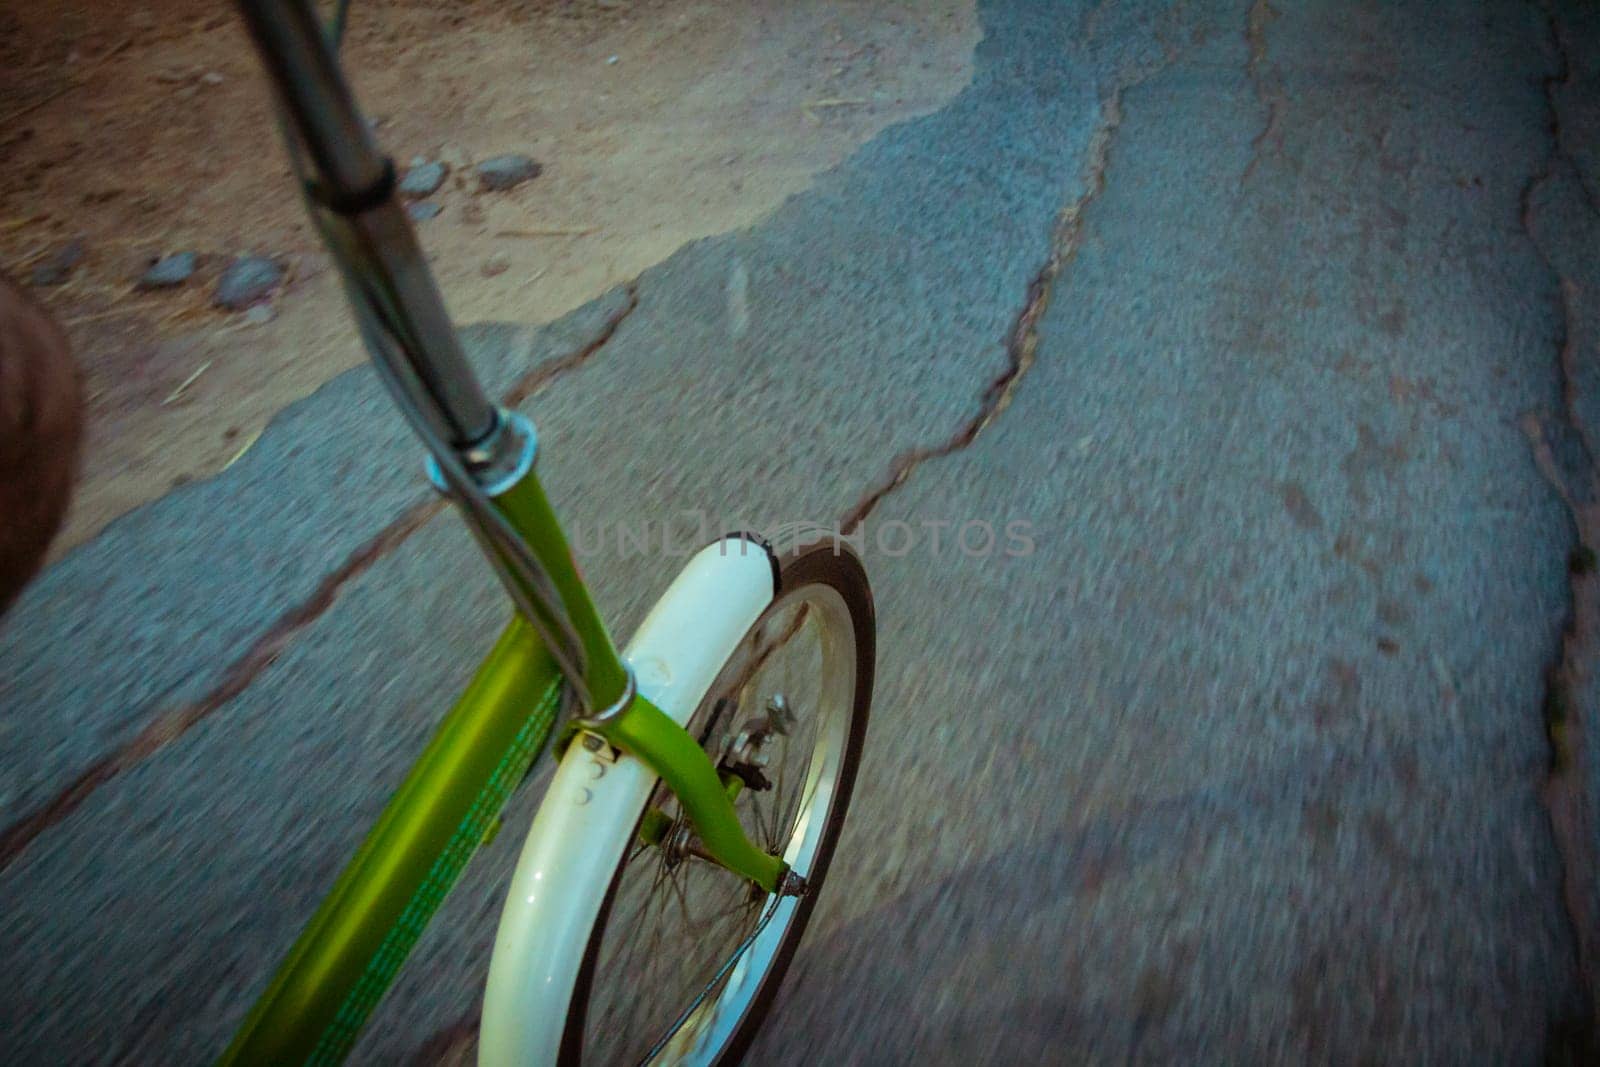 Riding a bike on the road. Original point of view (POV).